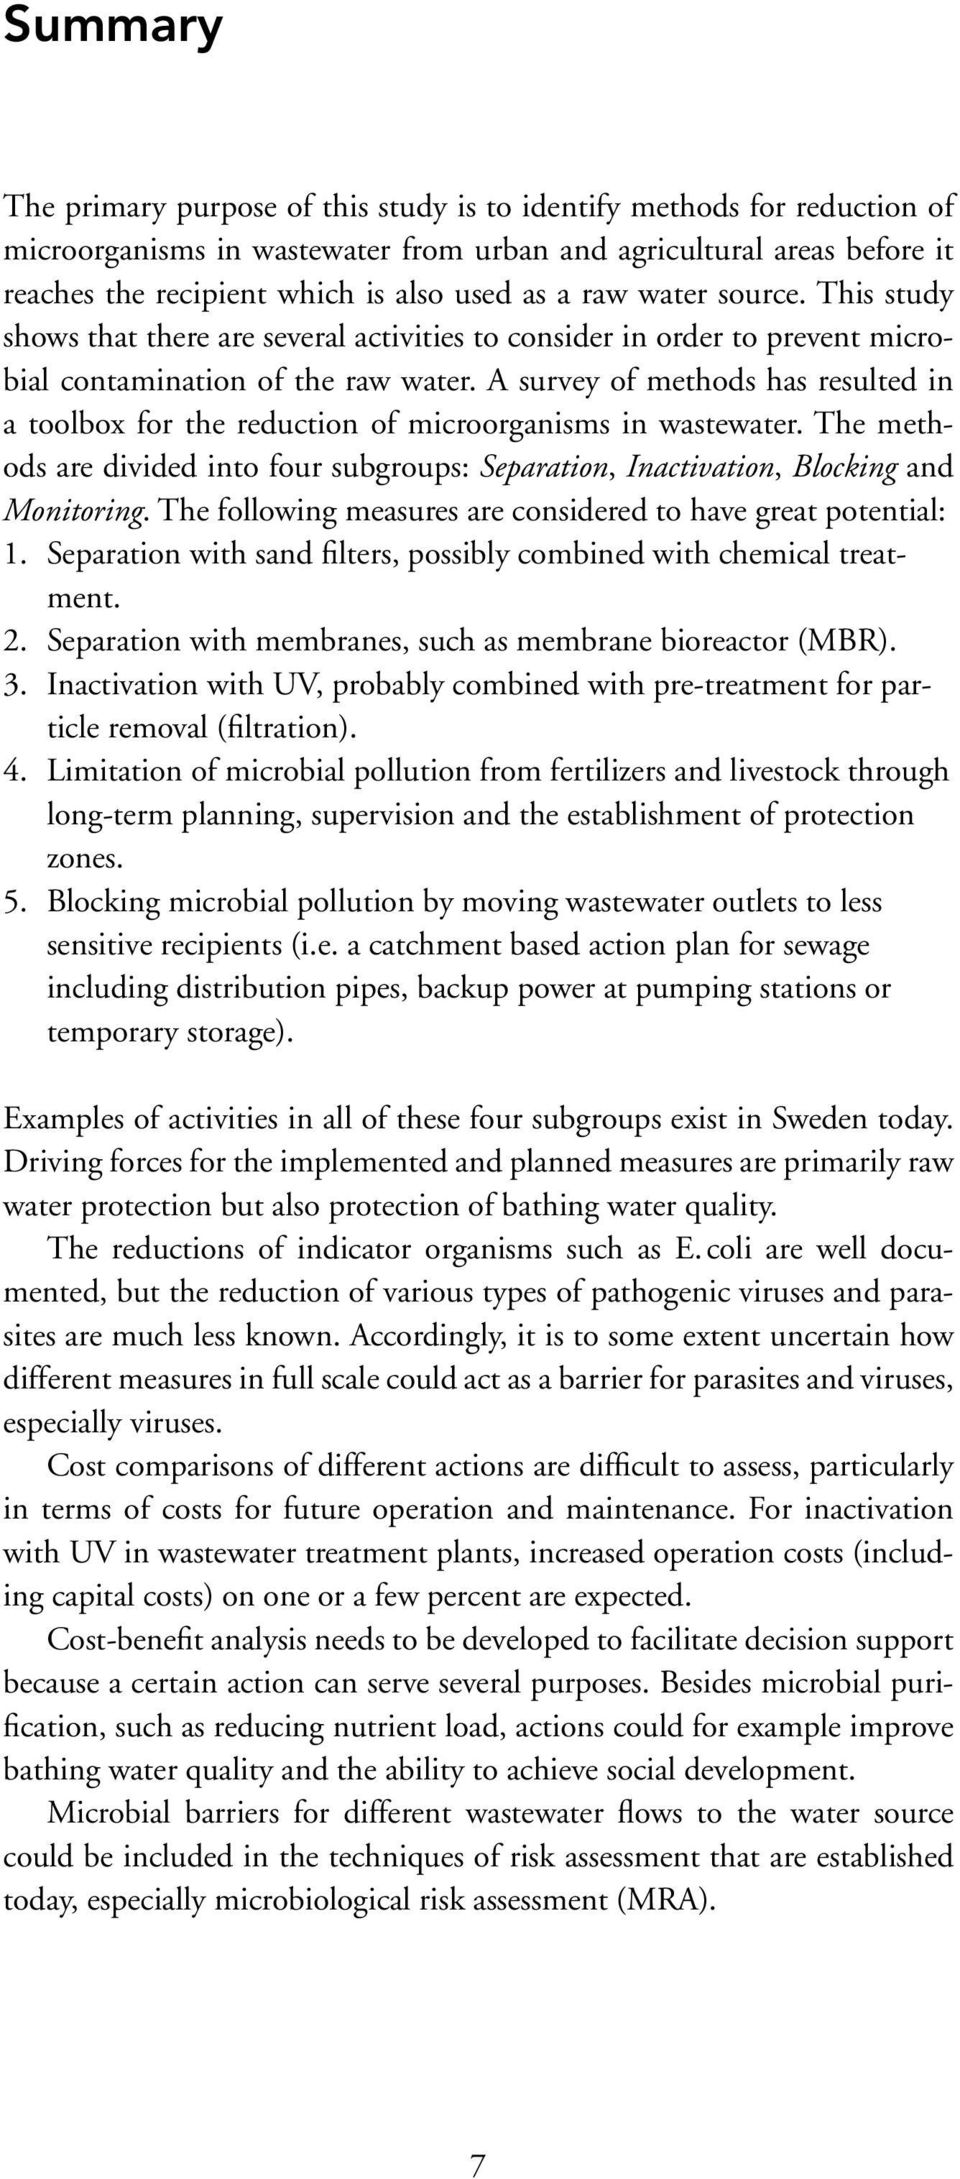 A survey of methods has resulted in a toolbox for the reduction of microorganisms in wastewater. The methods are divided into four subgroups: Separation, Inactivation, Blocking and Monitoring.